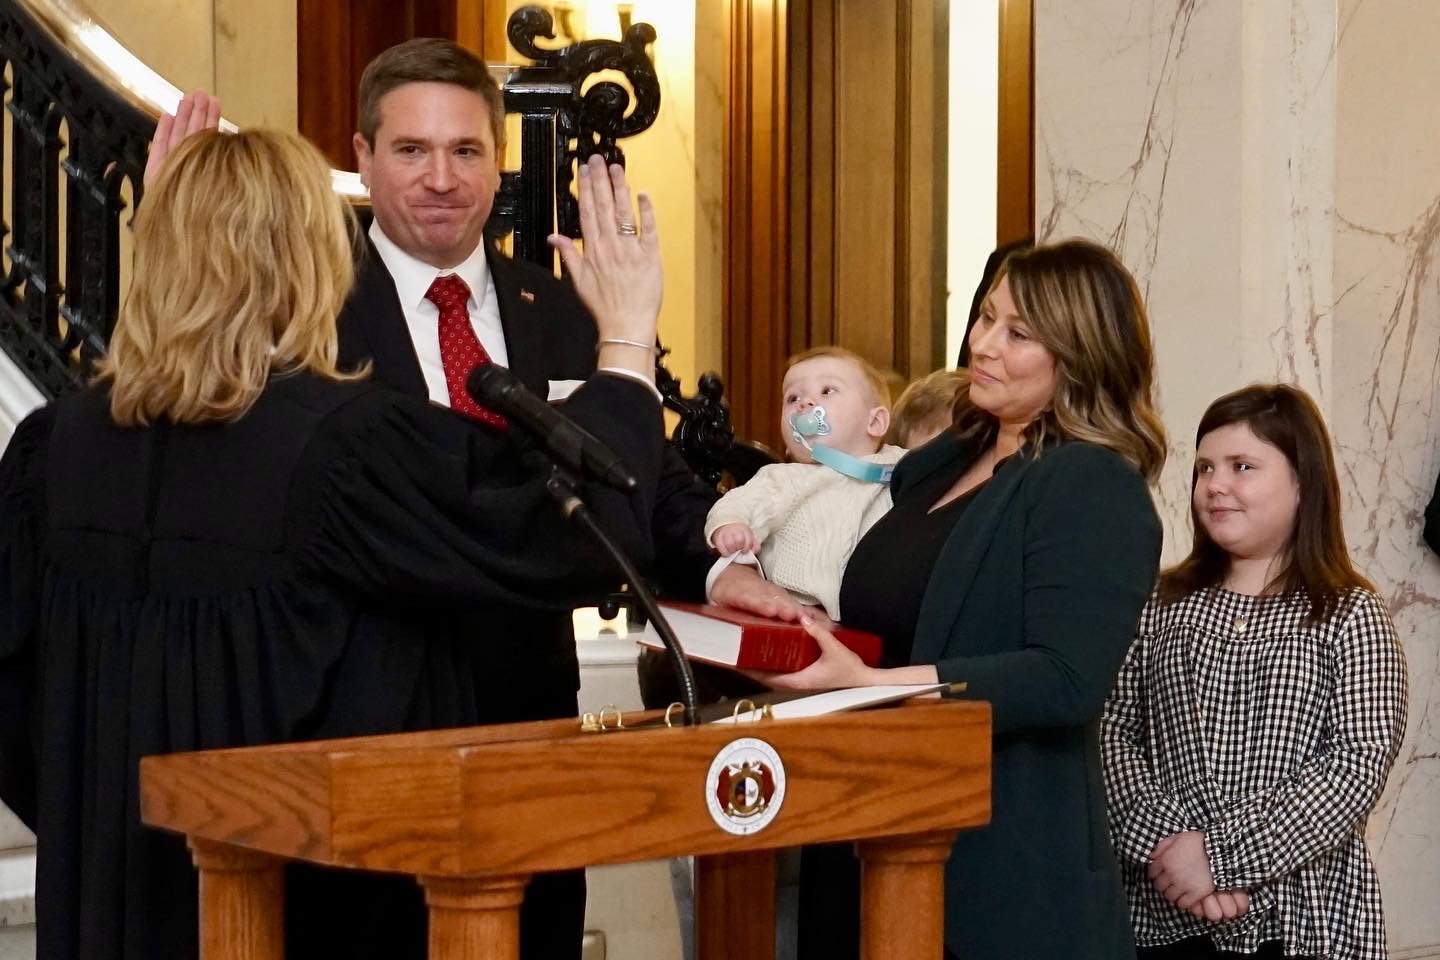 Rhineland resident Andrew Bailey is sworn in as Missouri Attorney General on Jan. 3 in Jefferson City, while his wife and children look on.